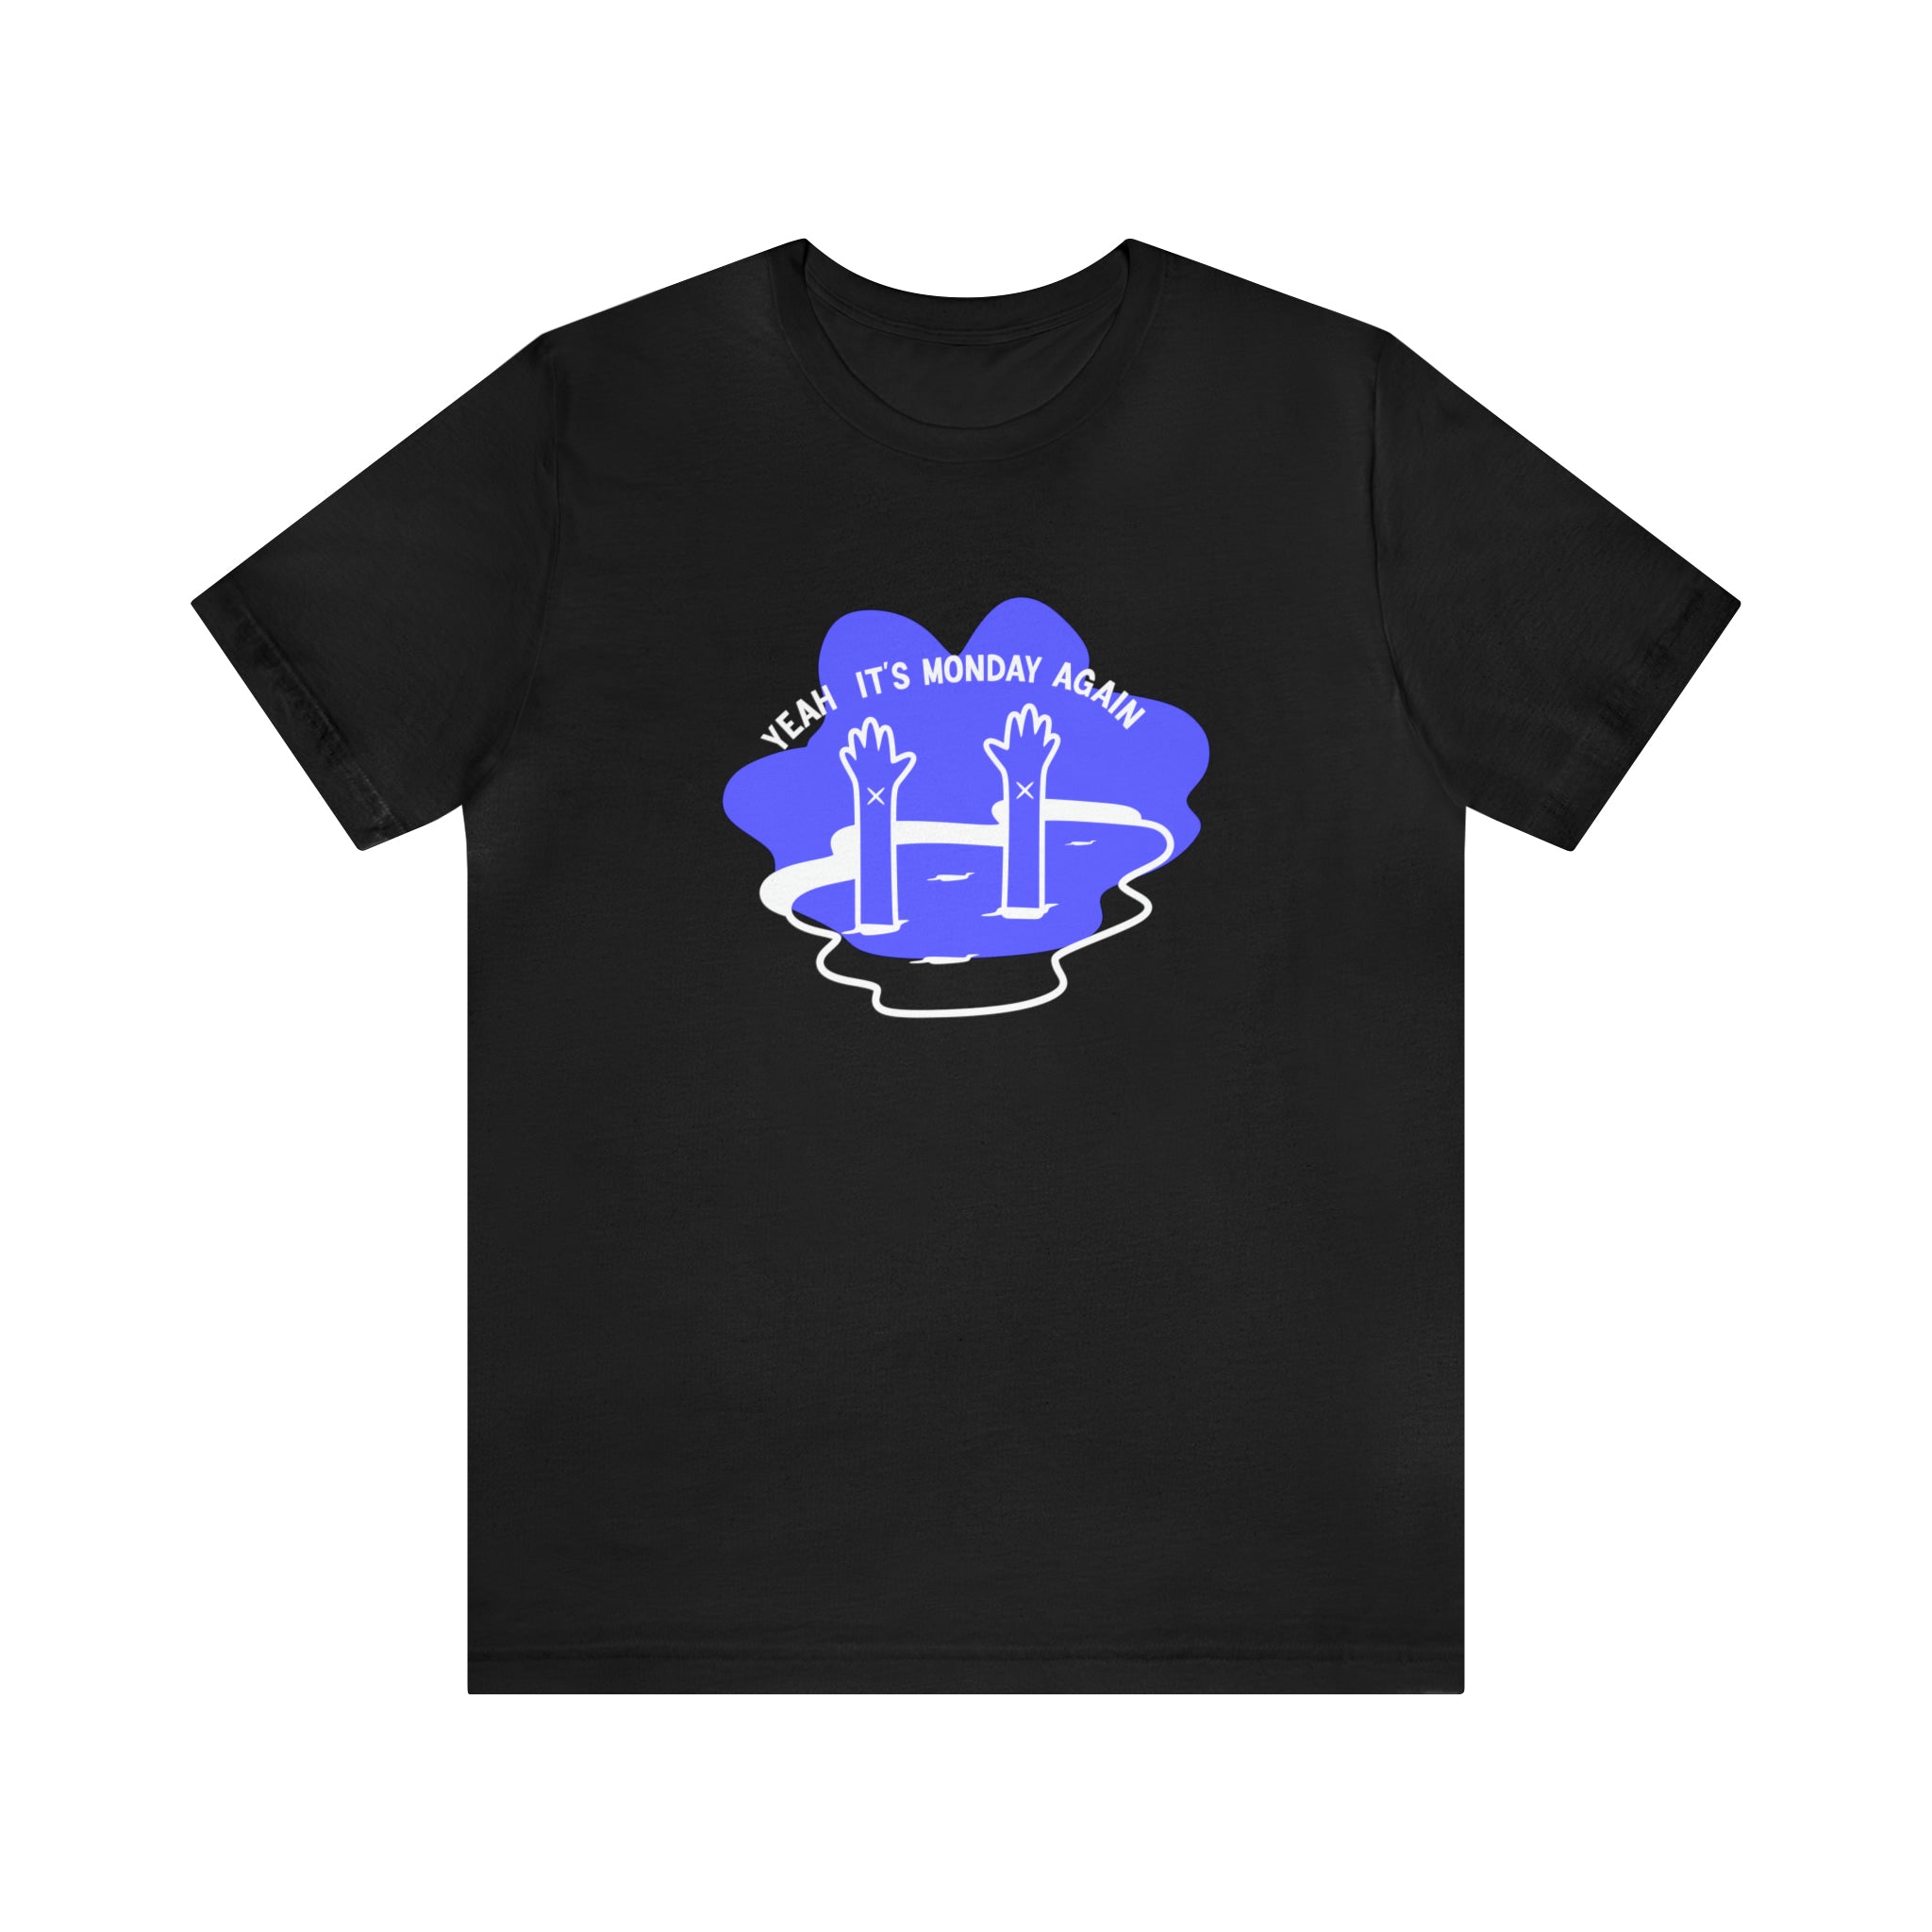 A cotton tee with a blue logo on it that is perfect for your favorite day or Yeah Its Monday Again T-Shirt.